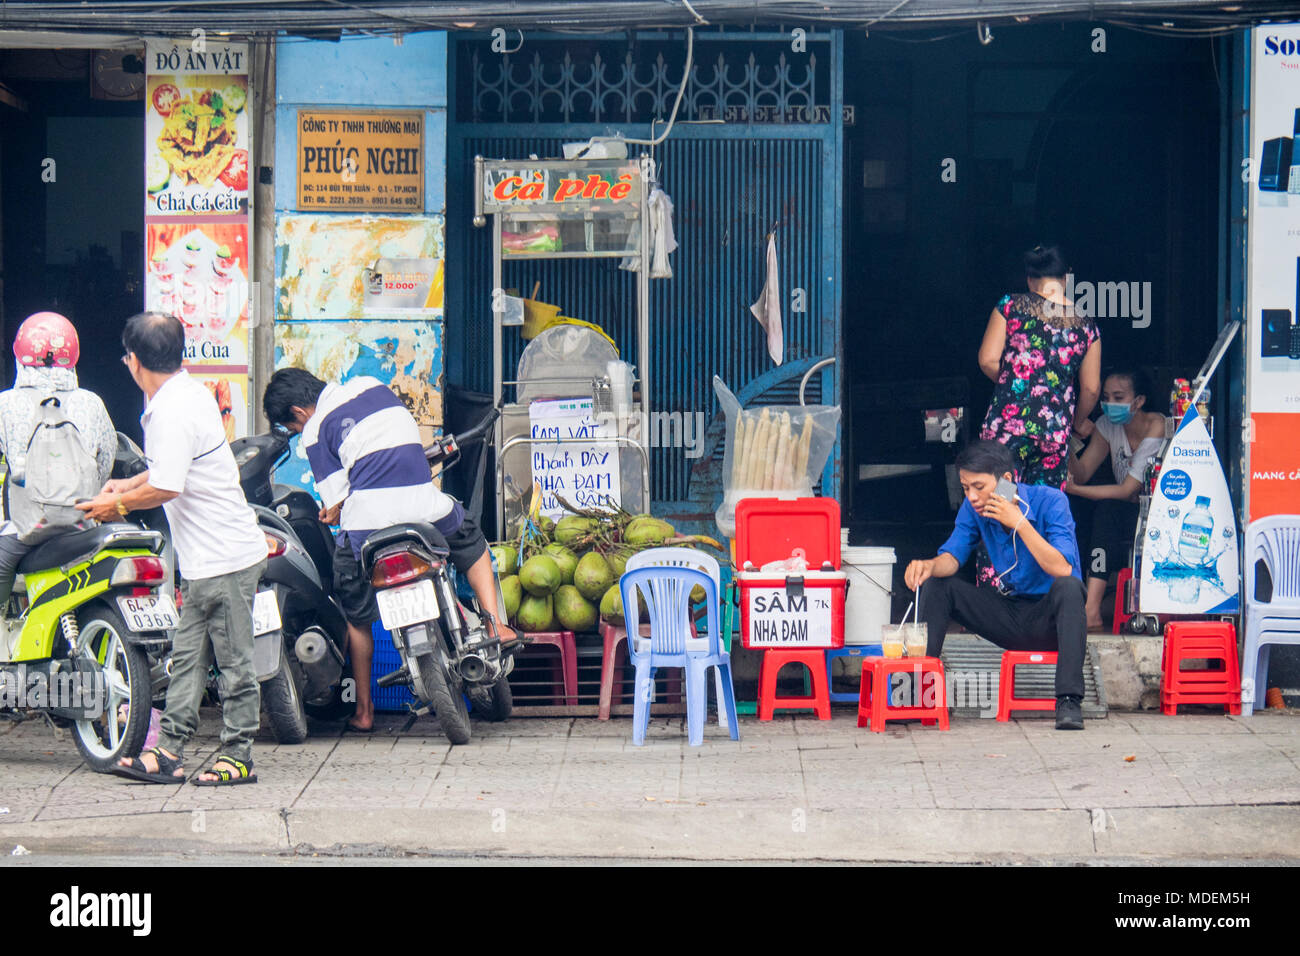 Motorcyclists parking their motorbikes on the pavement, and a Vietnamese man sitting on a plastic stool talking on his mobile phone and having a drink. Stock Photo